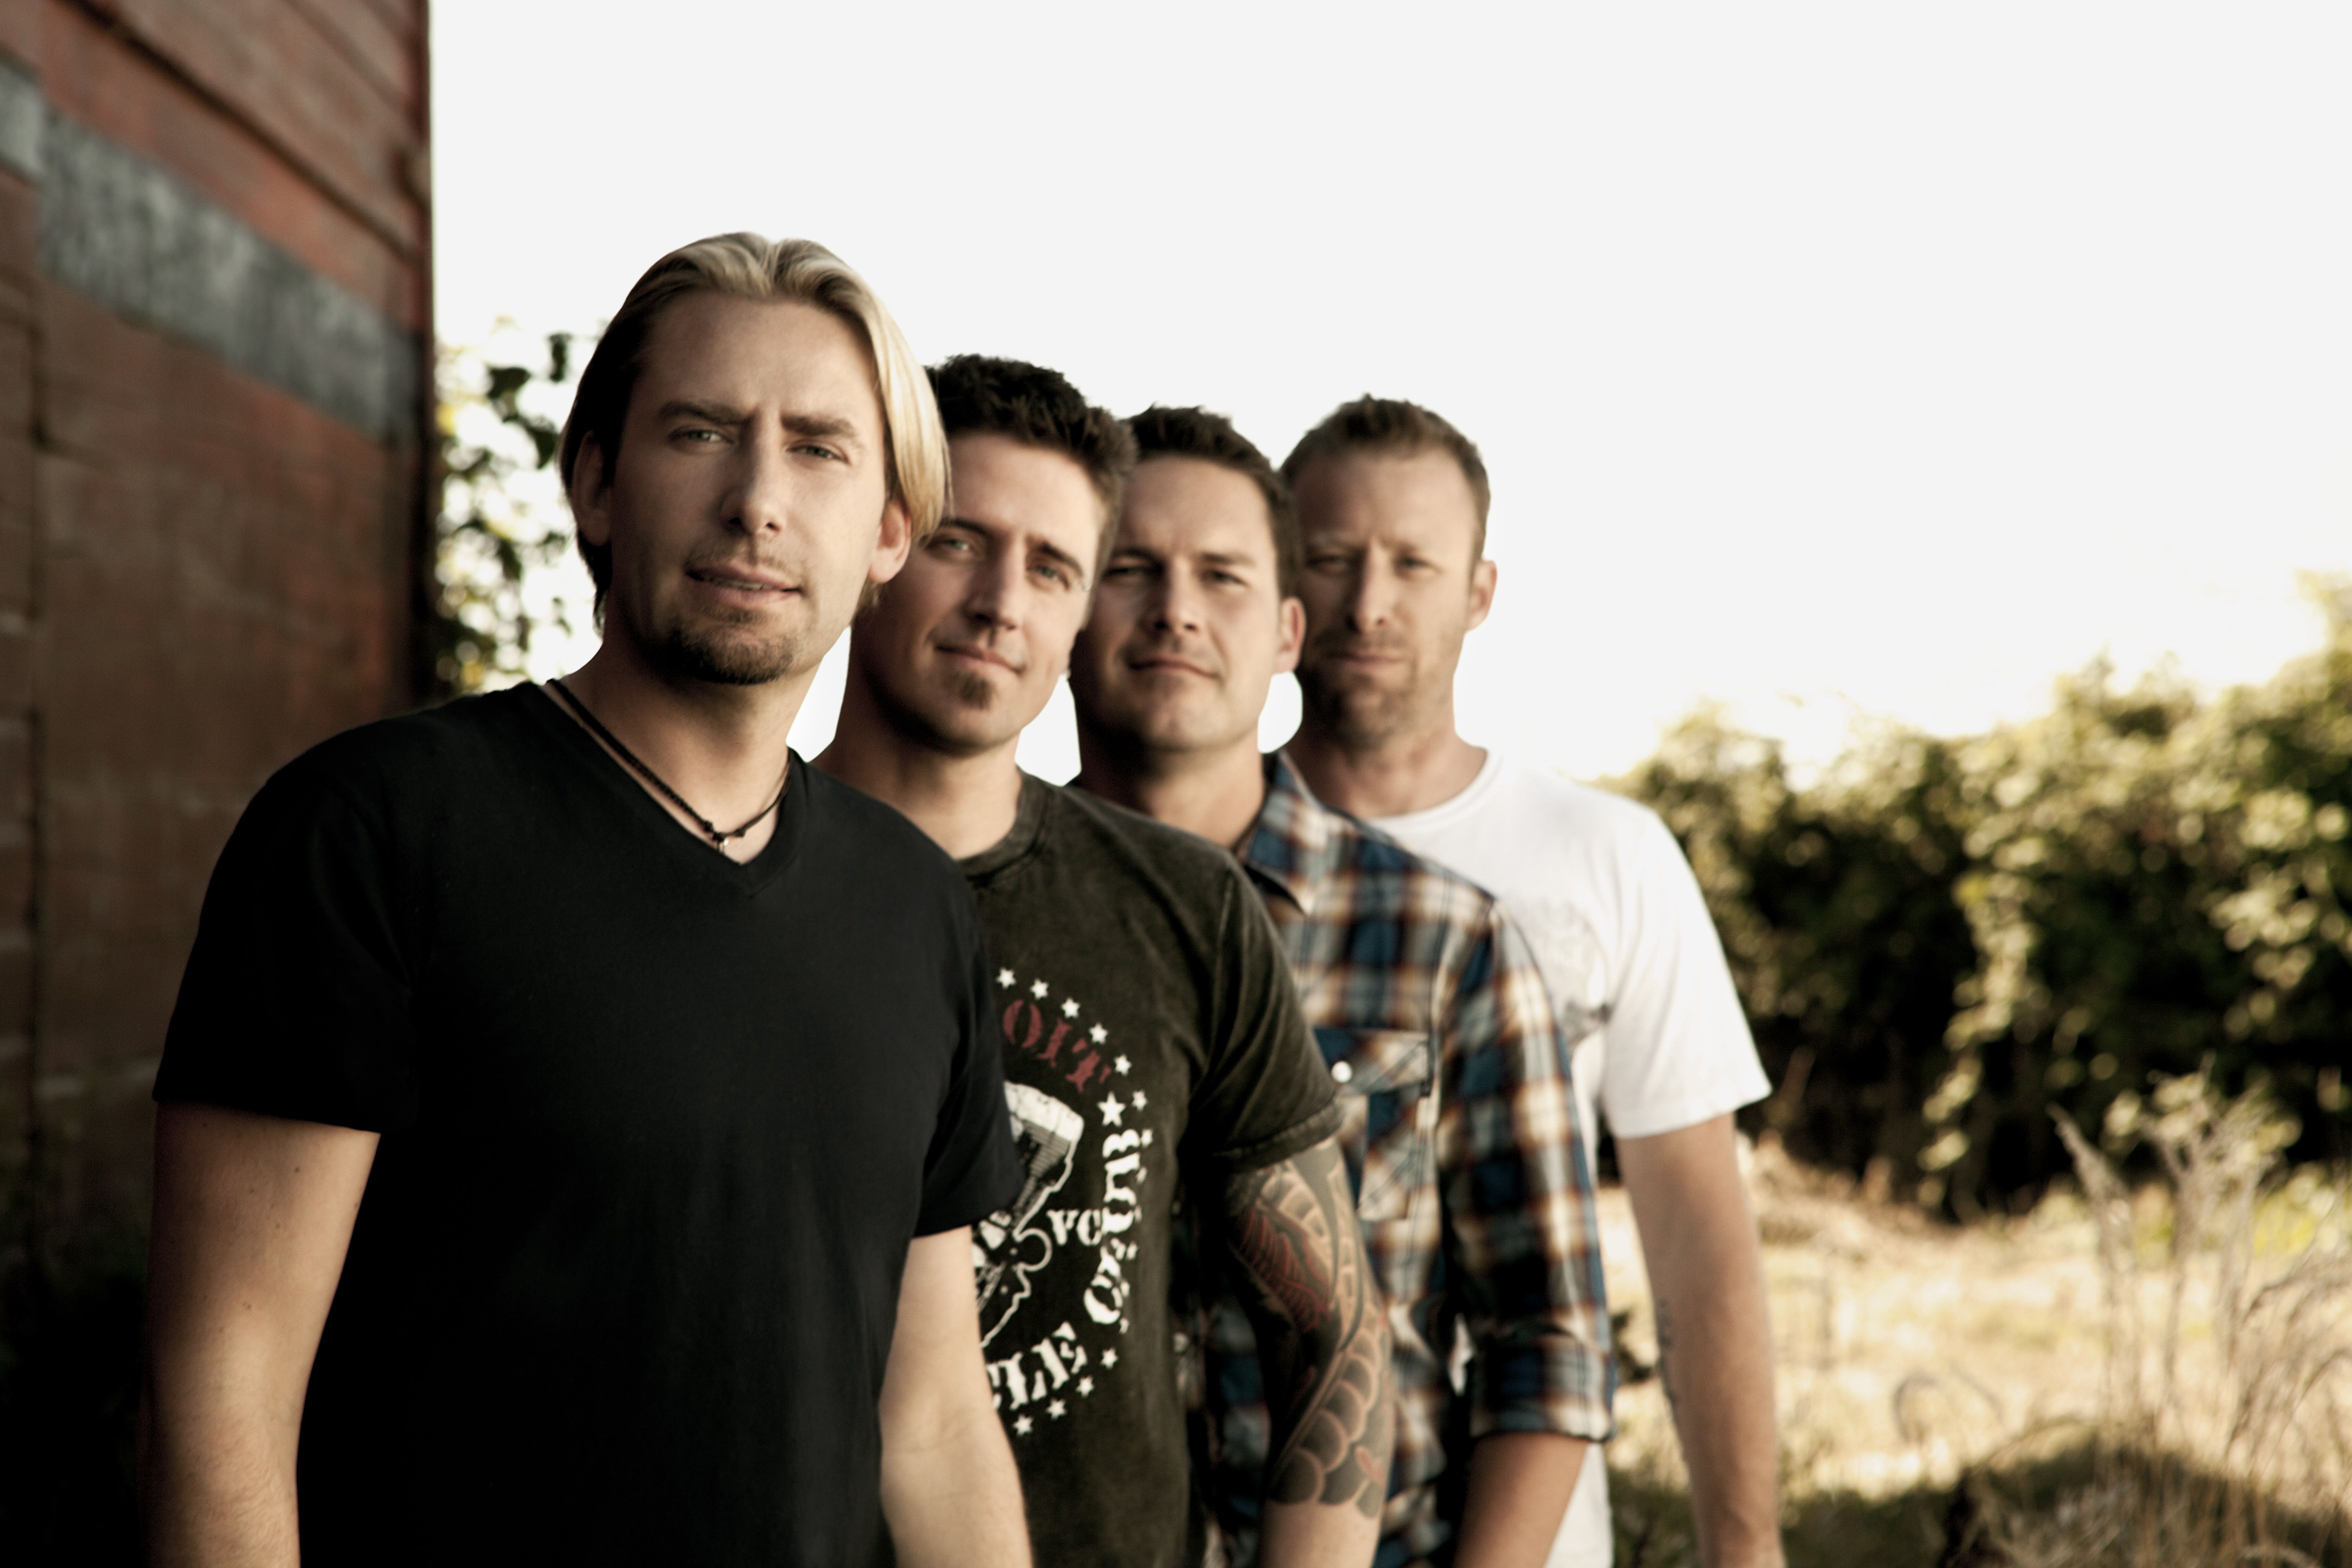 Rock band Nickelback wallpapers and images - wallpapers, pictures